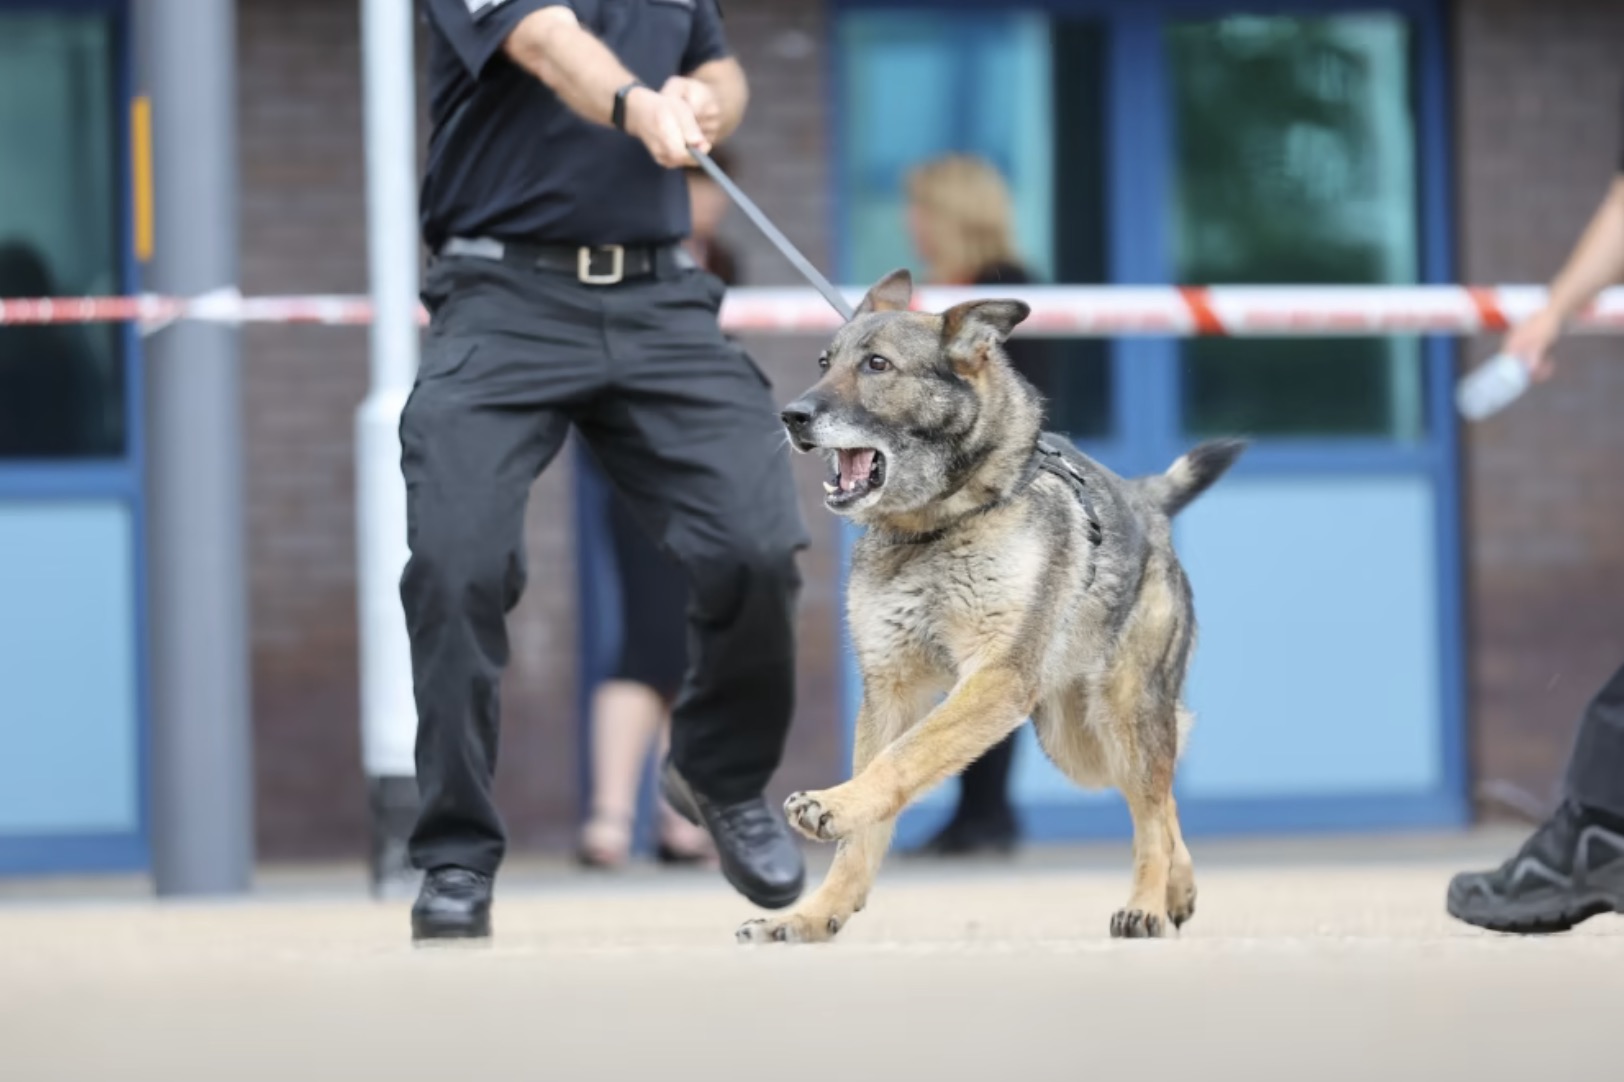 PD Luna from Police Scotland